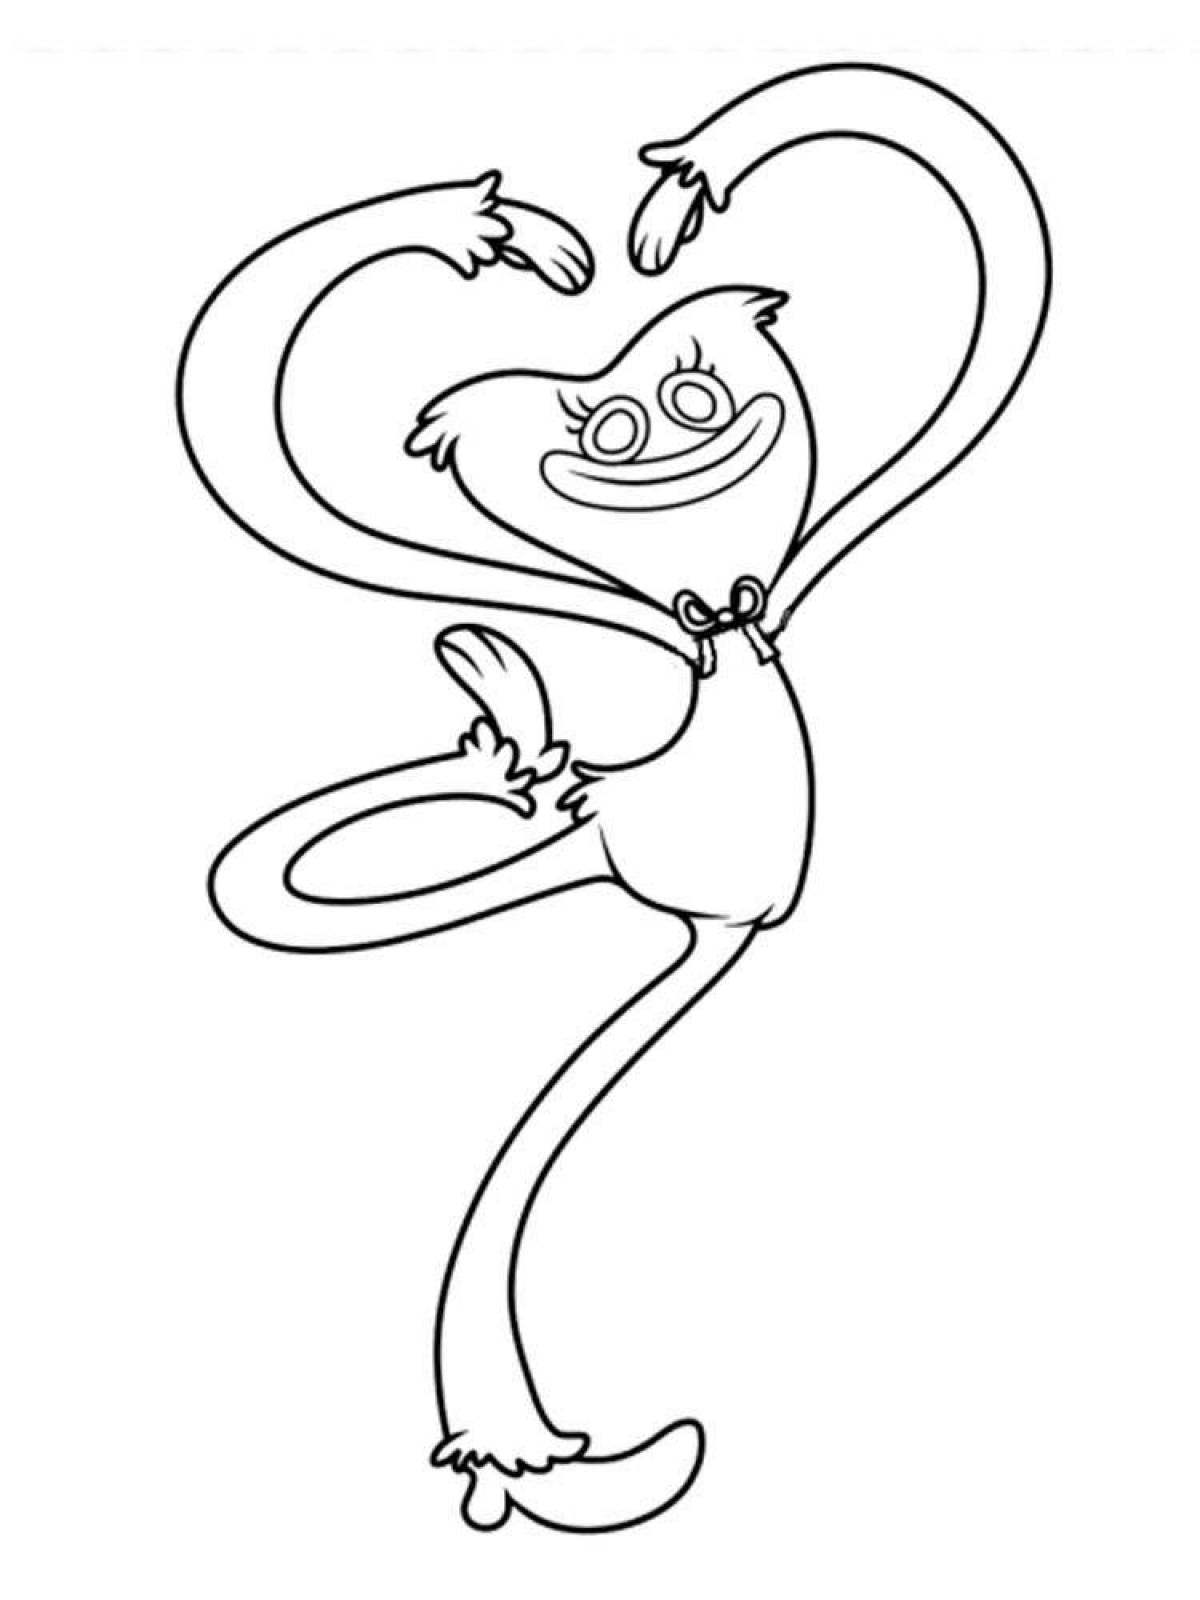 Happy huggy waggie coloring page